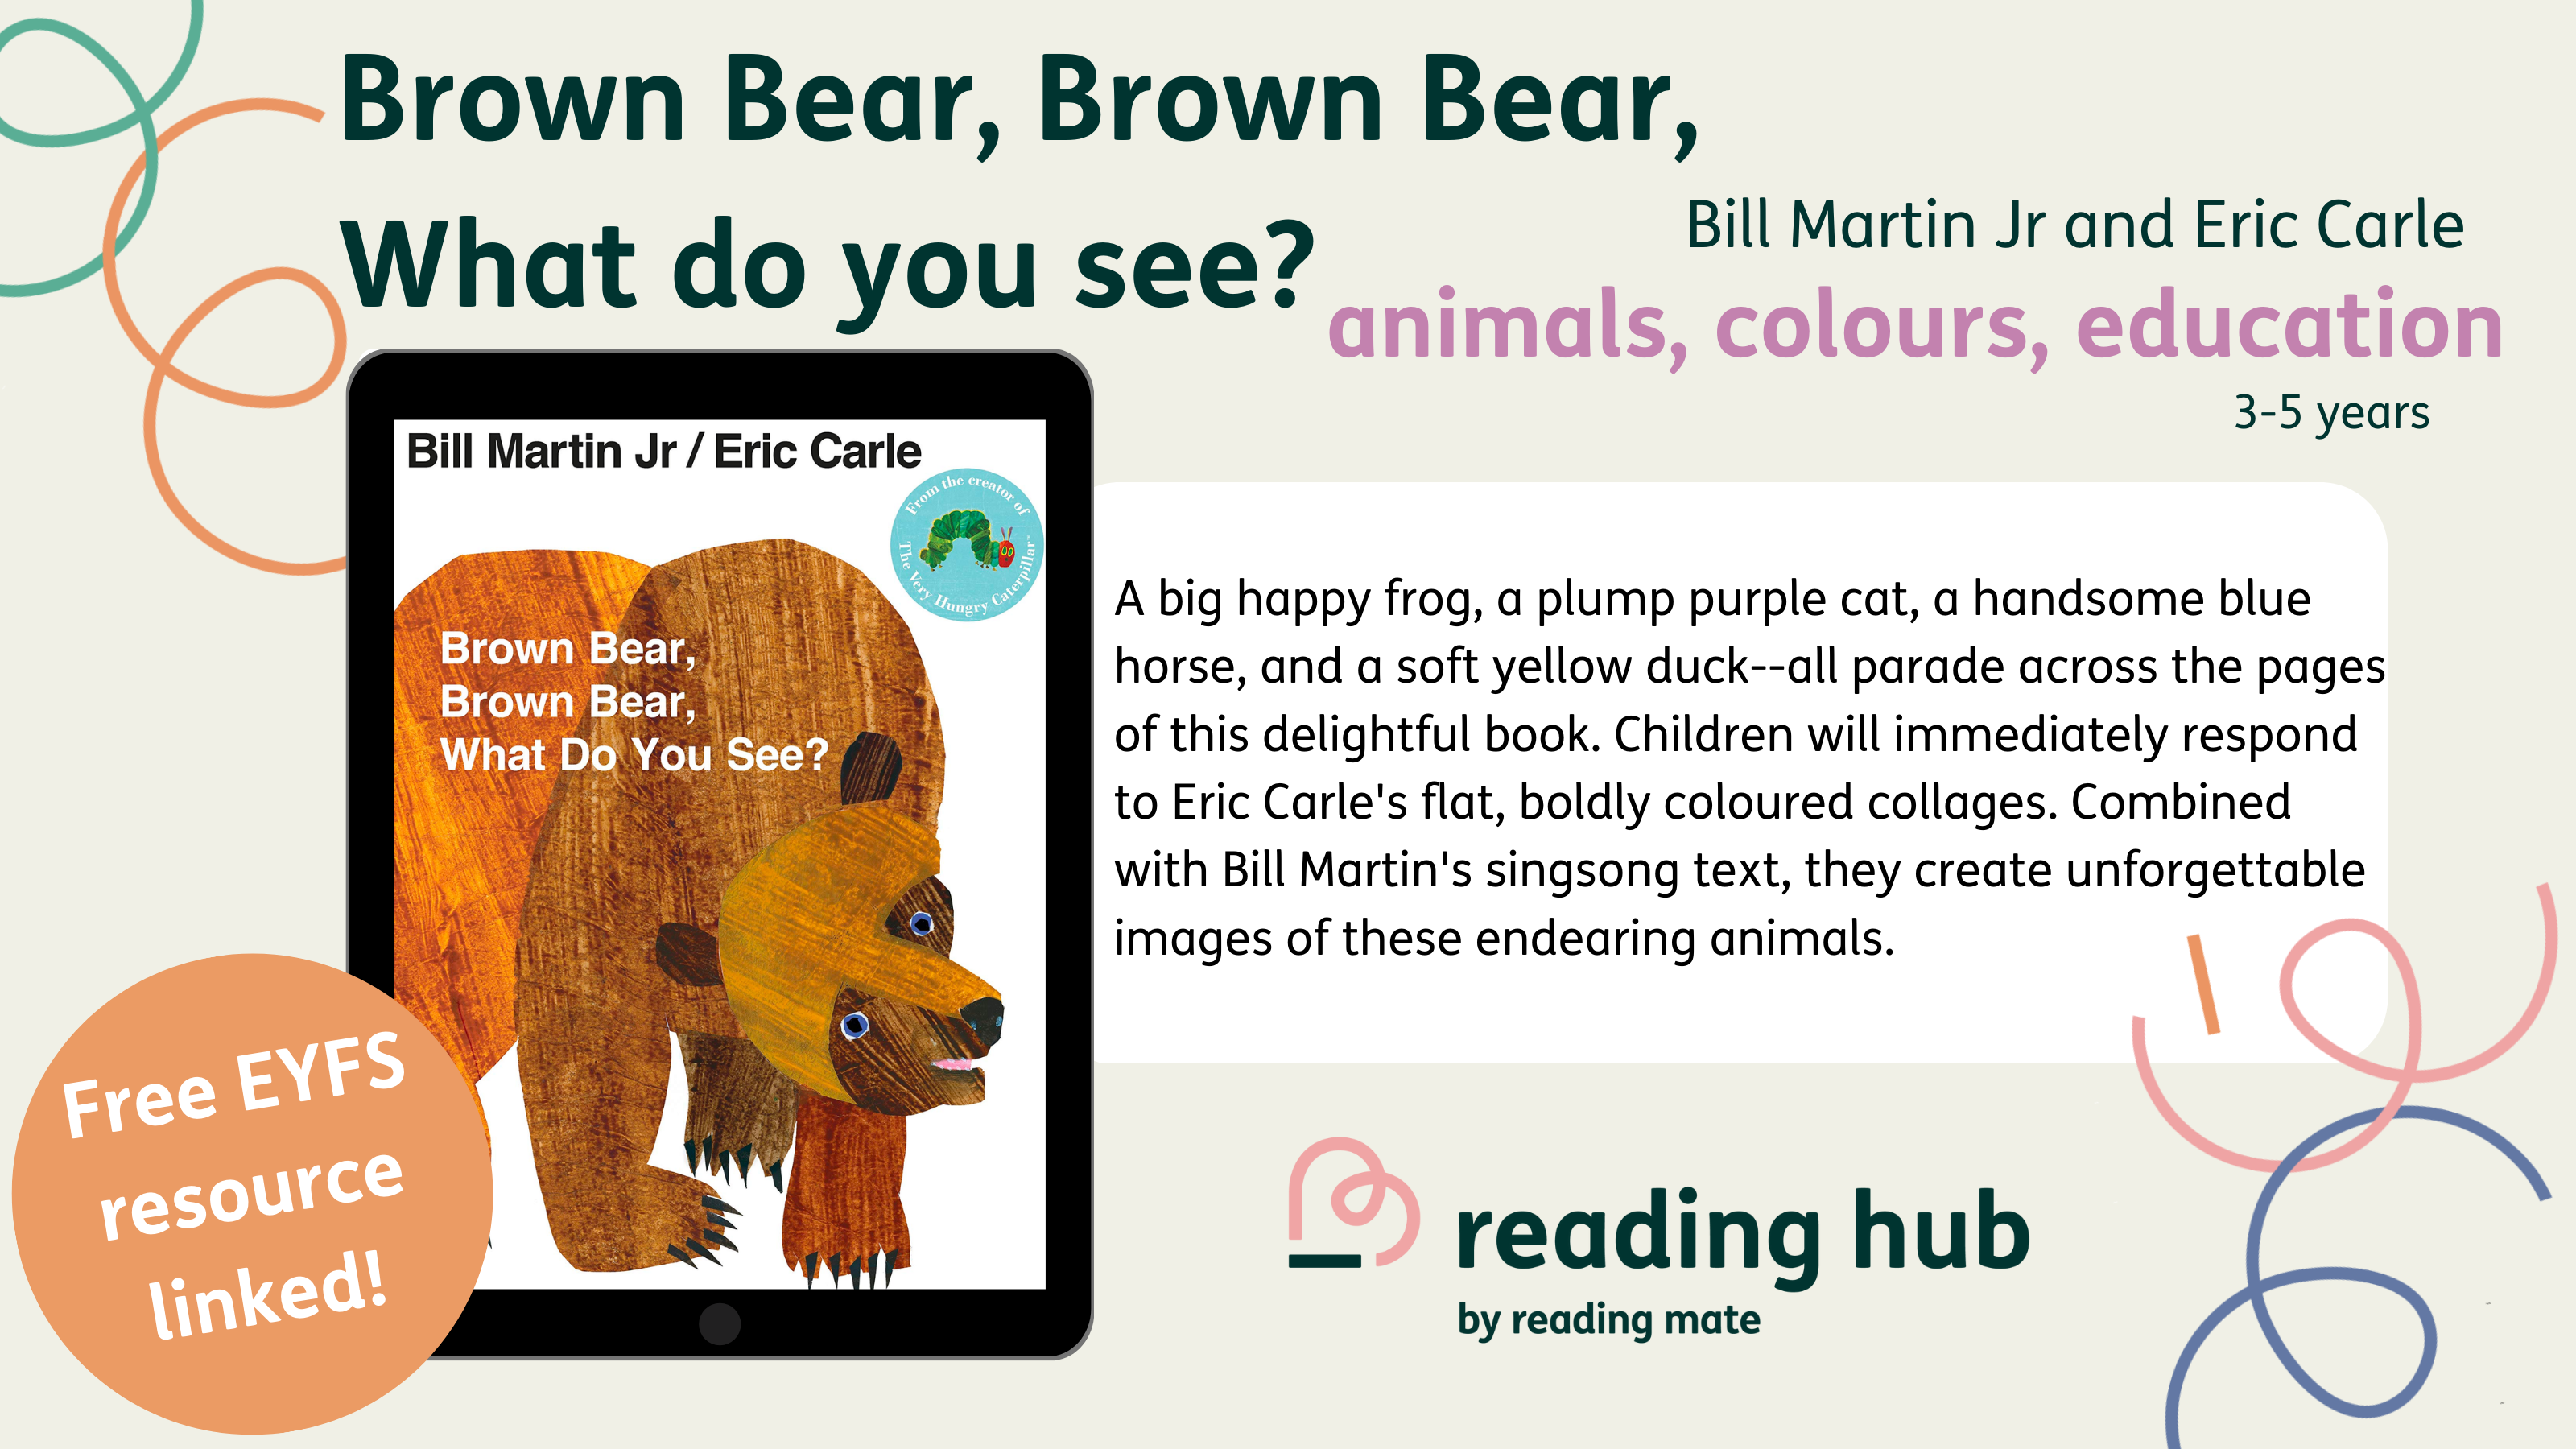 Brown Bear, brown bear, what do you see? By Bill Martin Jr. A big happy frog, a plump purple cat, a handsome blue horse, and a soft yellow duck--all parade across the pages of this delightful book. Children will immediately respond to Eric Carle's flat, boldly coloured collages. Combined with Bill Martin's singsong text, they create unforgettable images of these endearing animals.